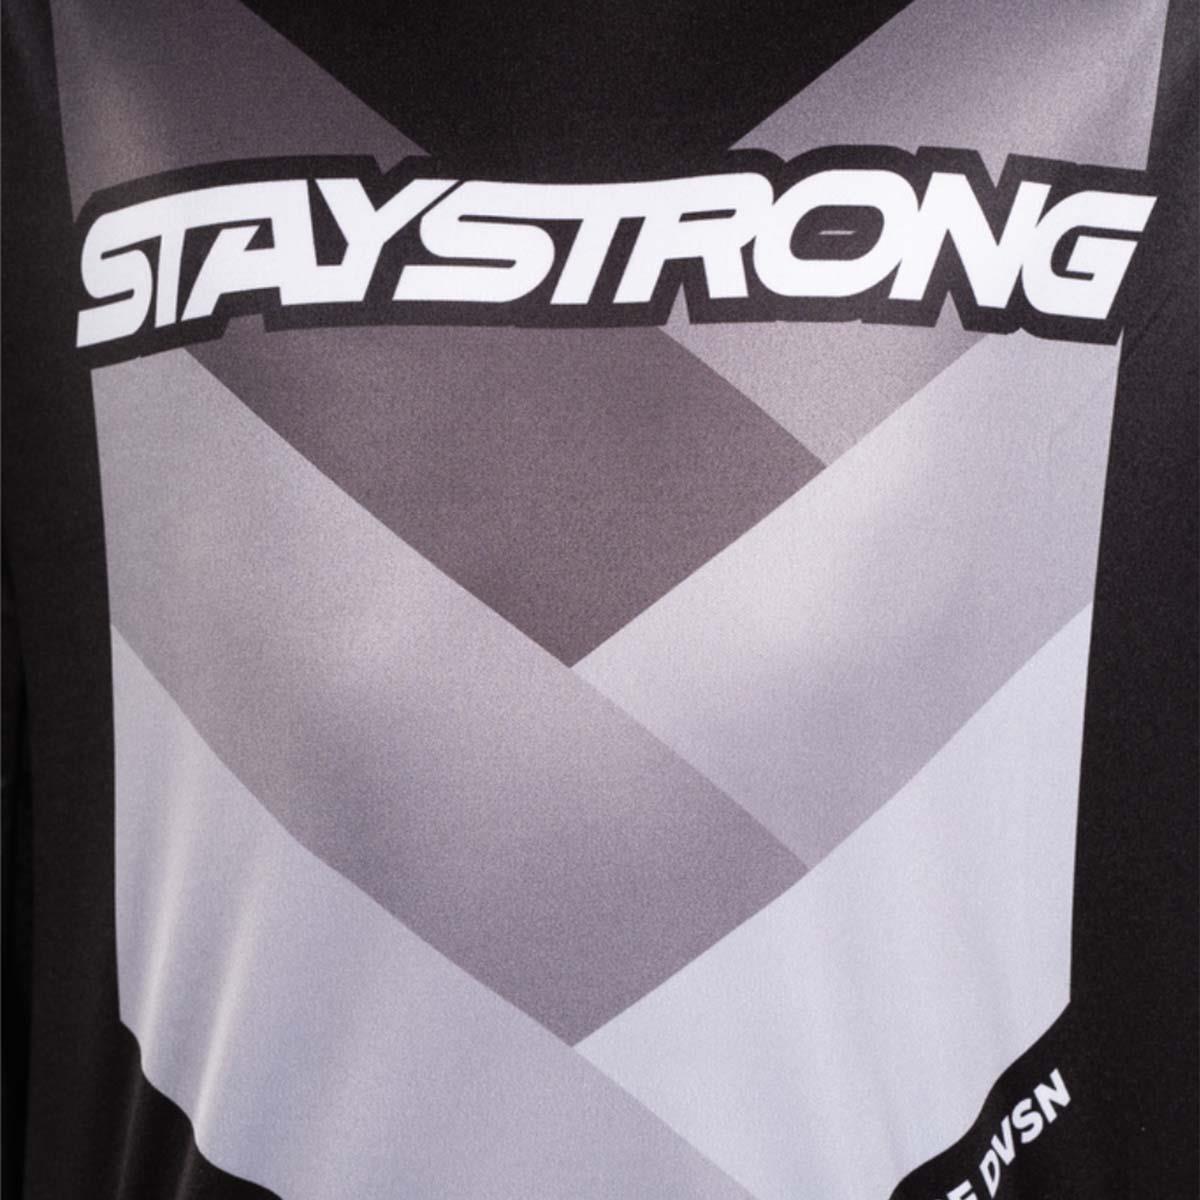 Stay Strong Youth Chevron Race Jersey - Black